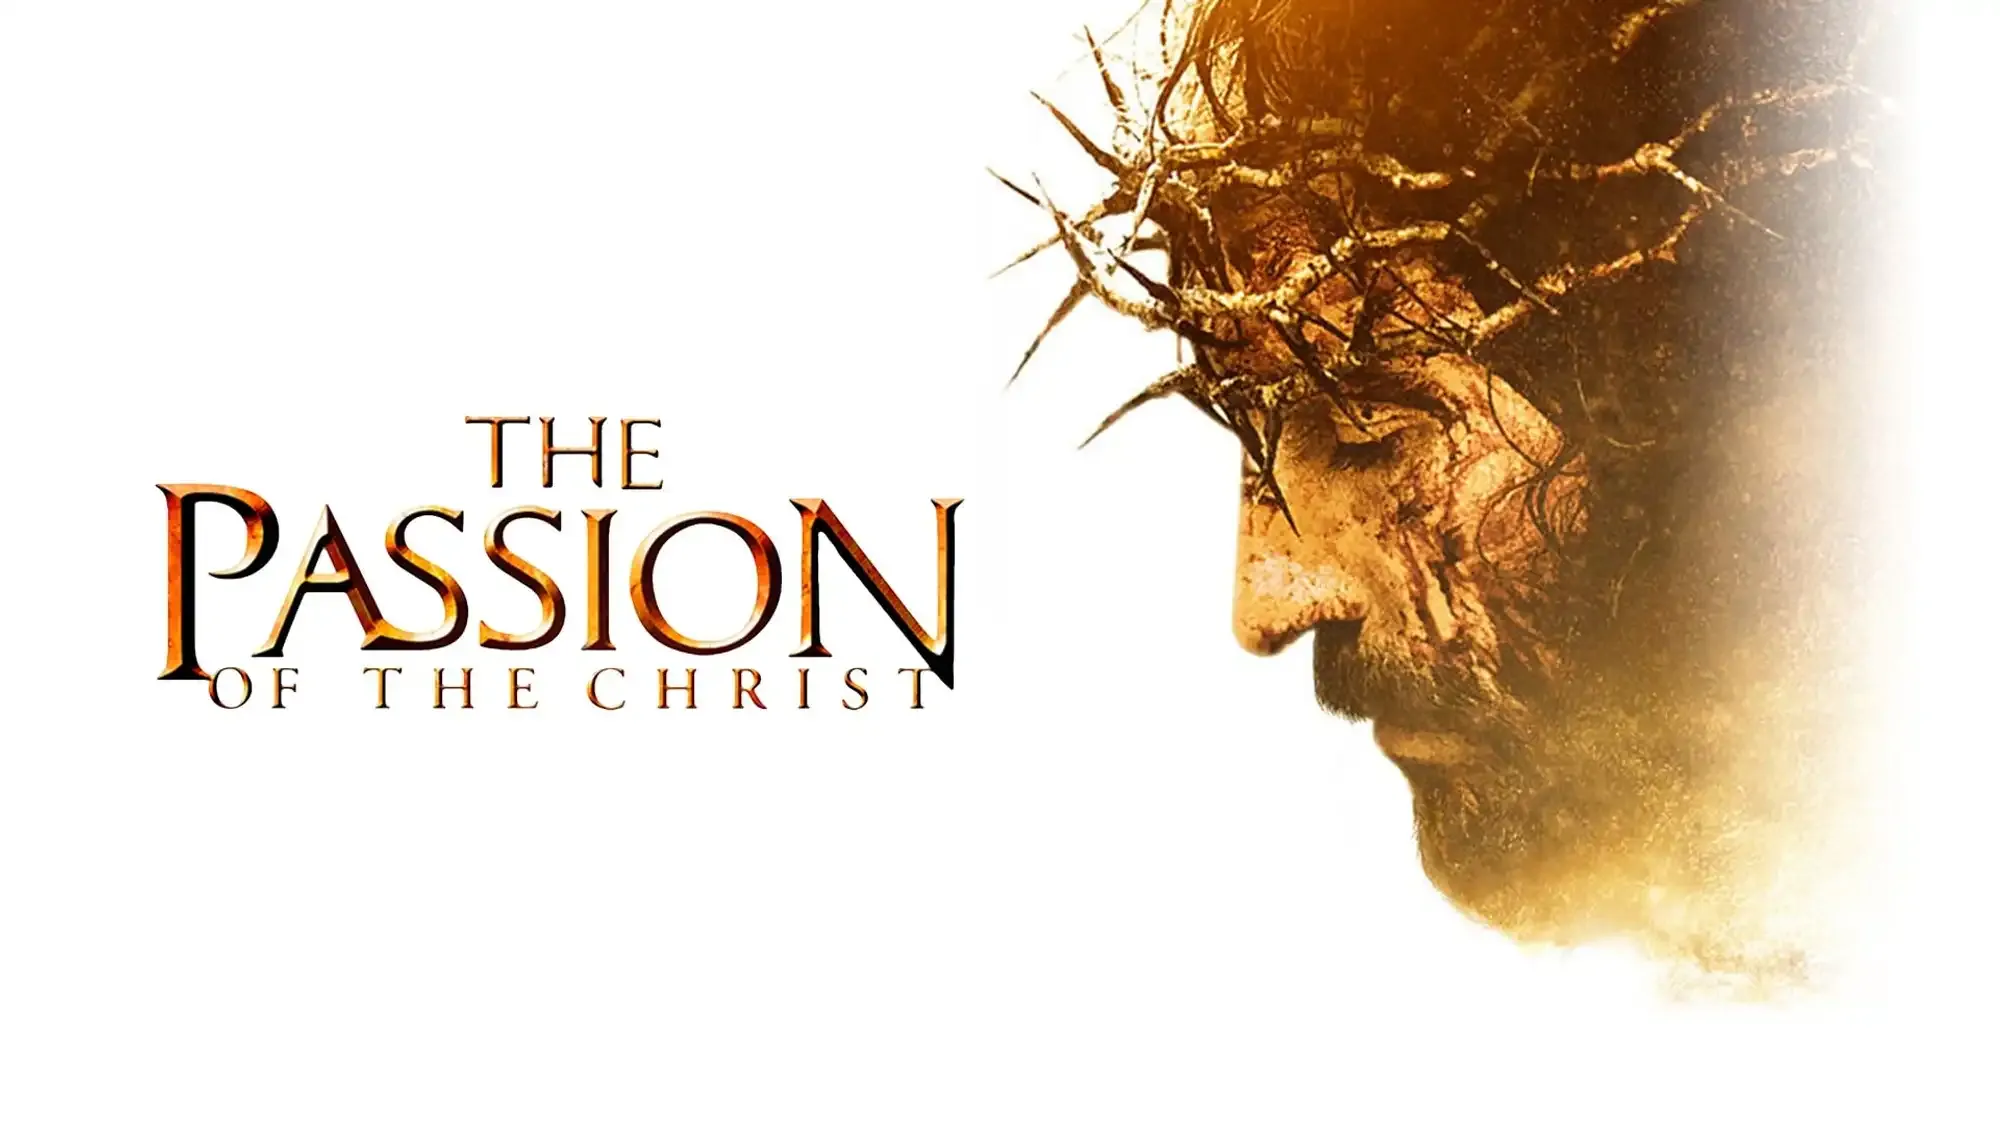 The Passion of the Christ movie review